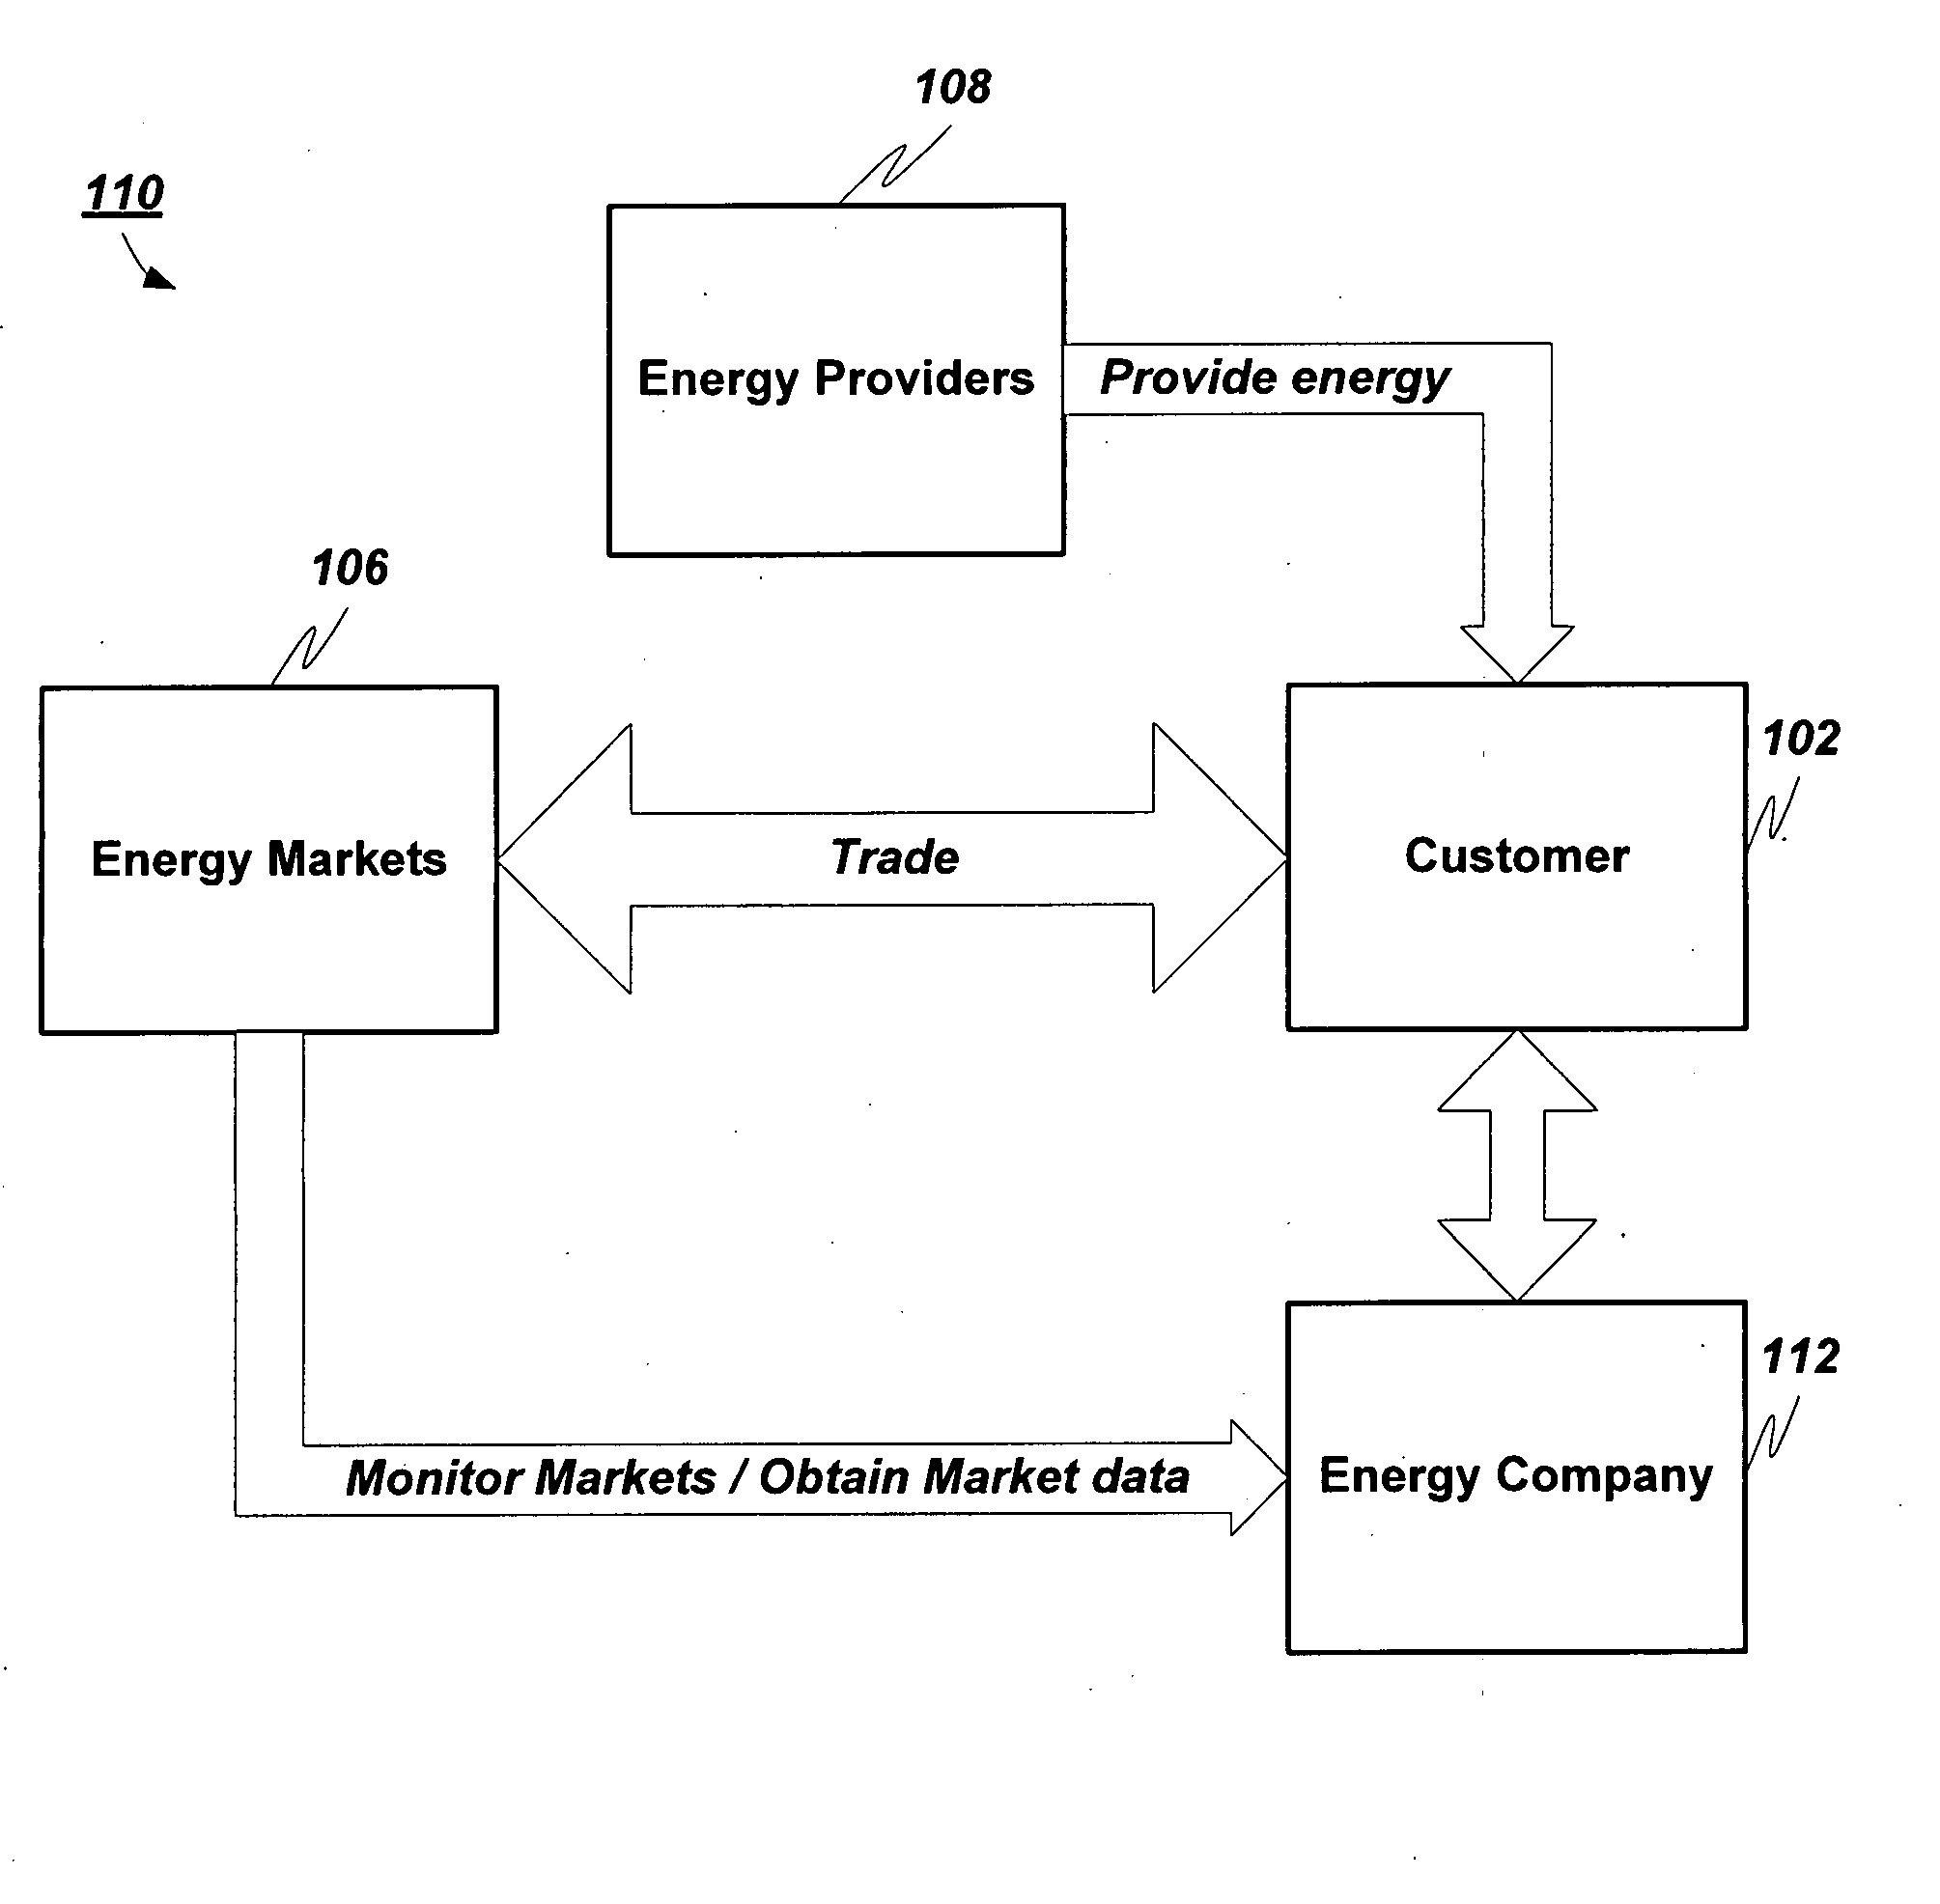 System for optimizing energy purchase decisions